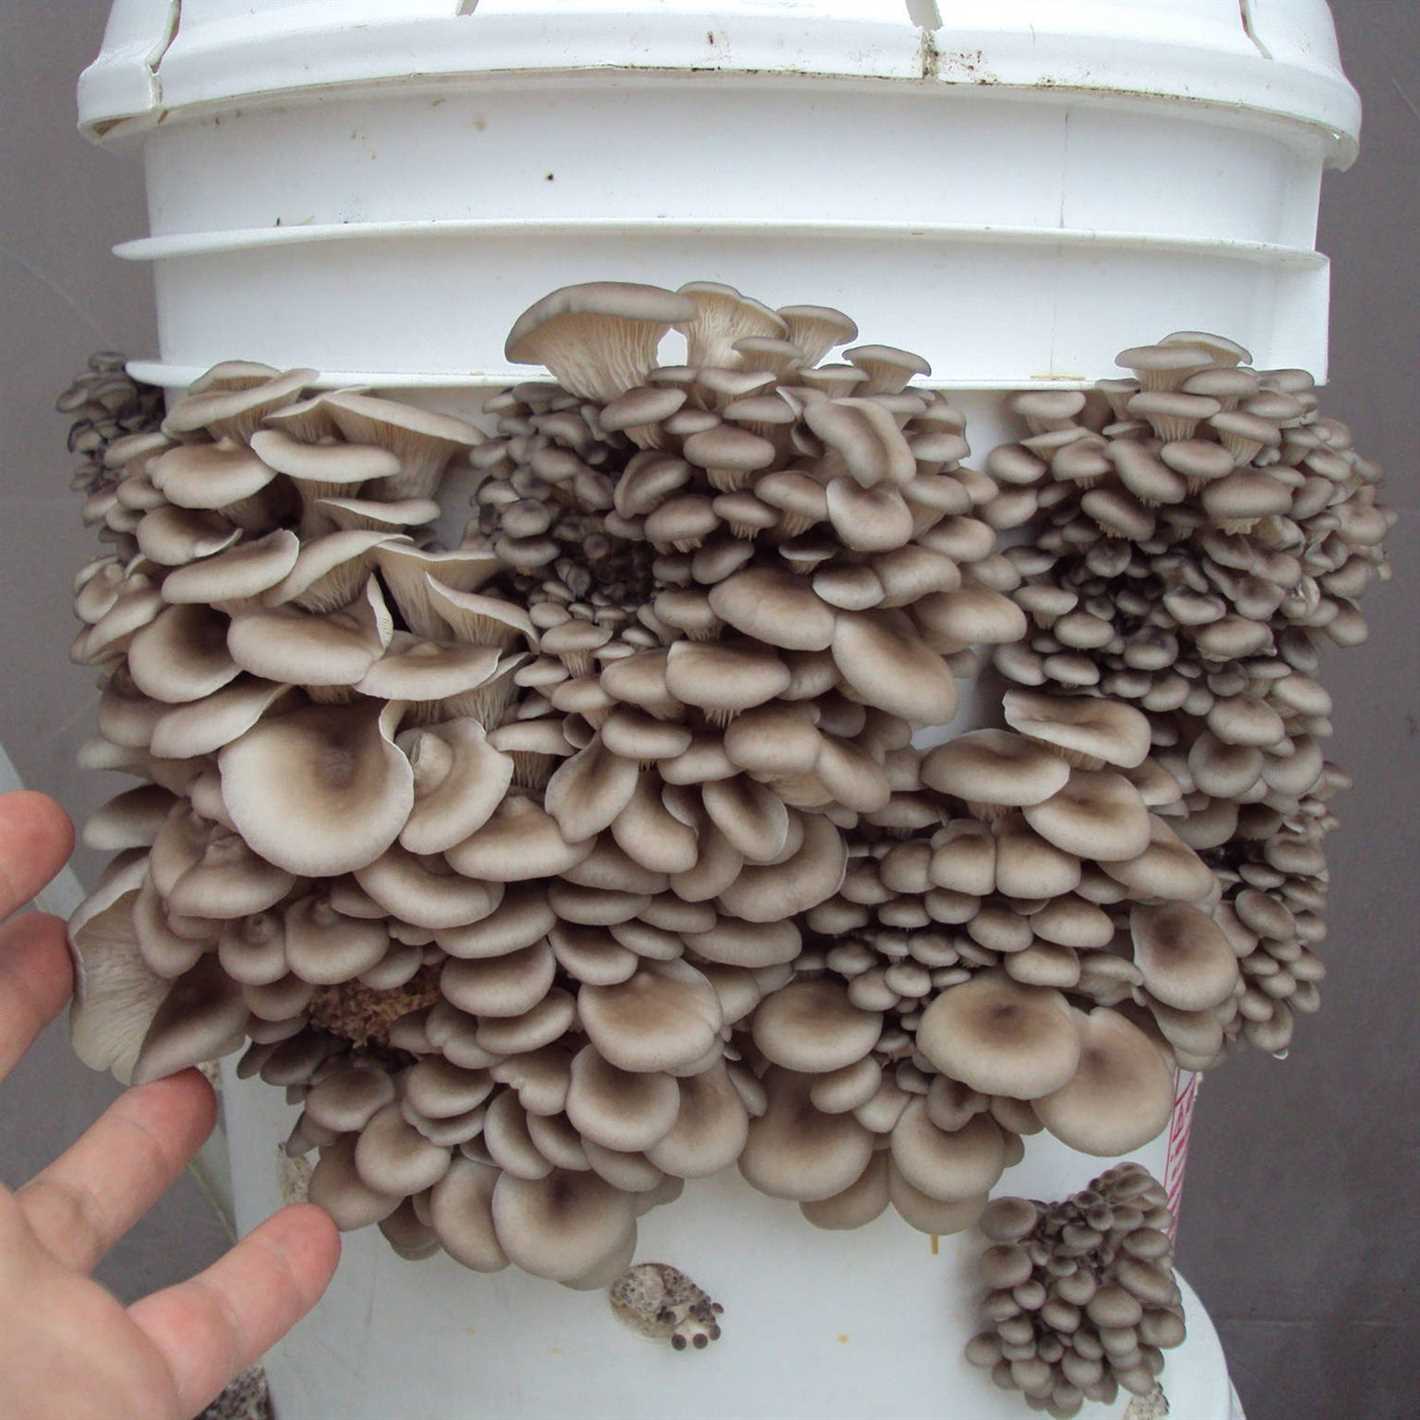 growing oyster mushrooms is it possible to get a w9iesd5l